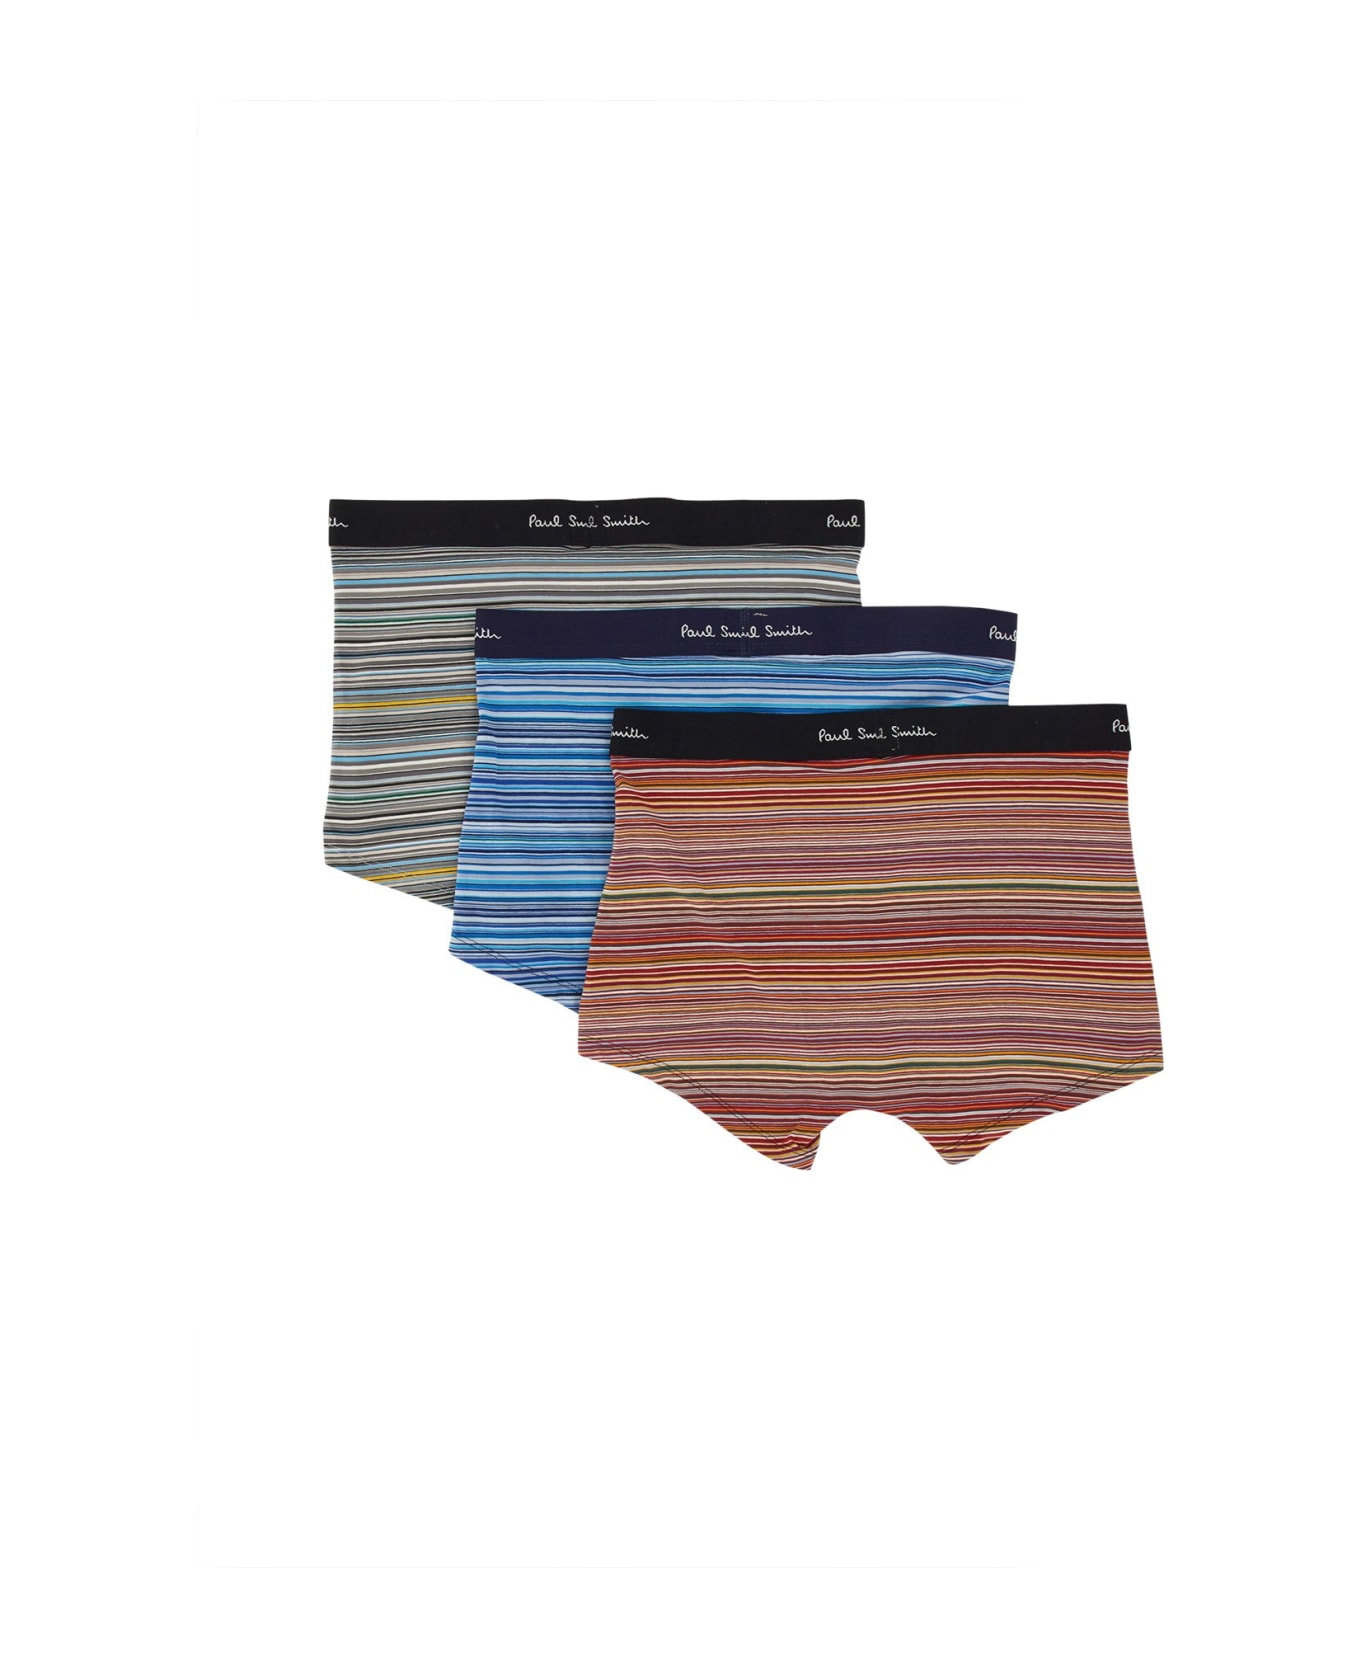 Paul Smith Pack Of Three Boxers - MultiColour